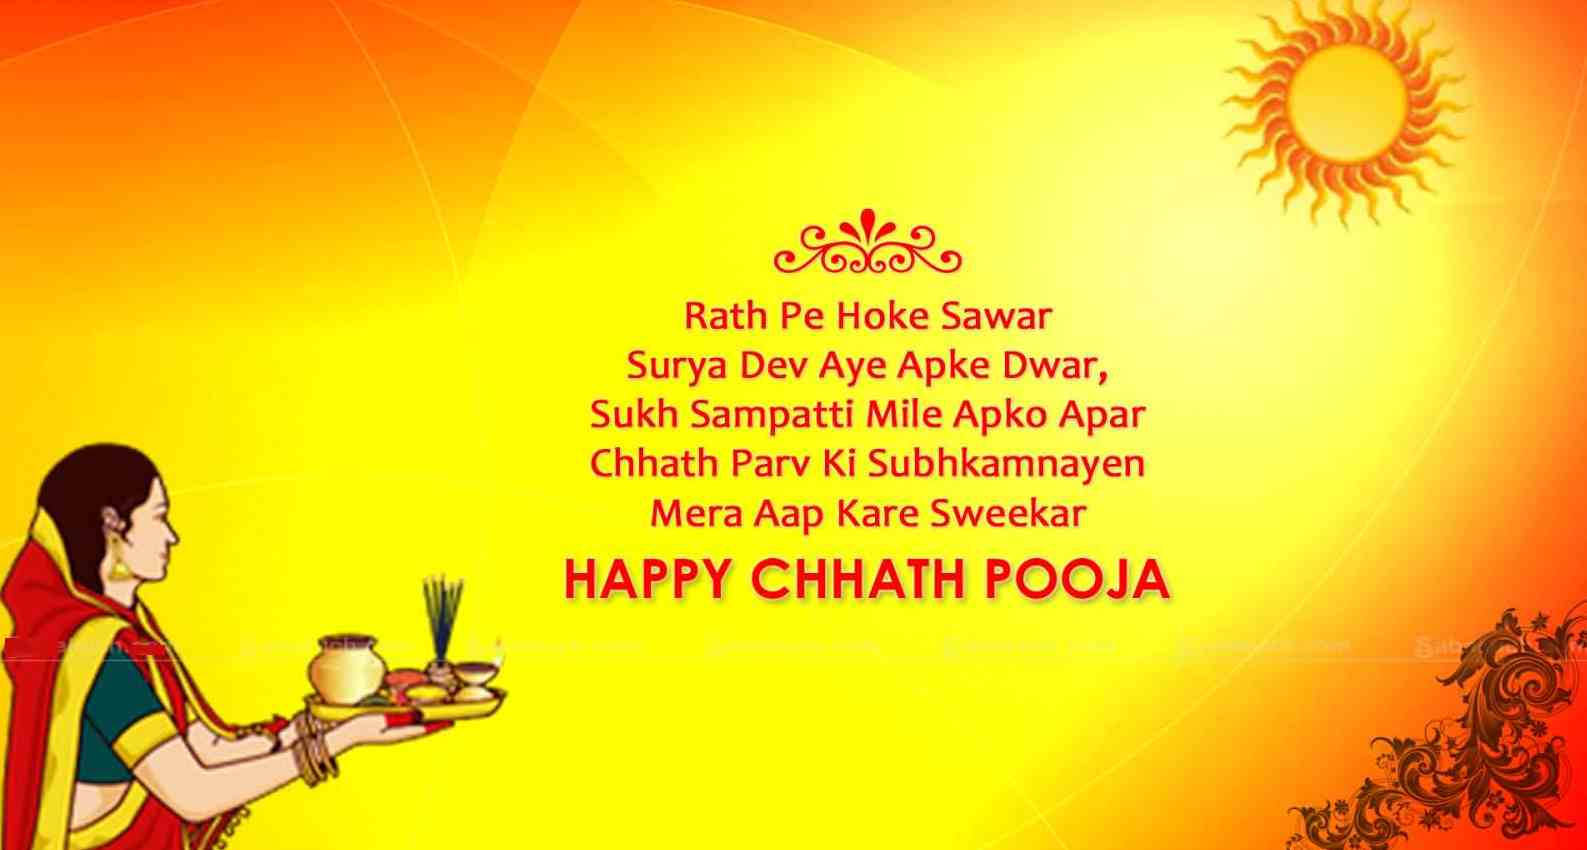 Chhath Puja With Inspirational Hindu Text Wallpaper